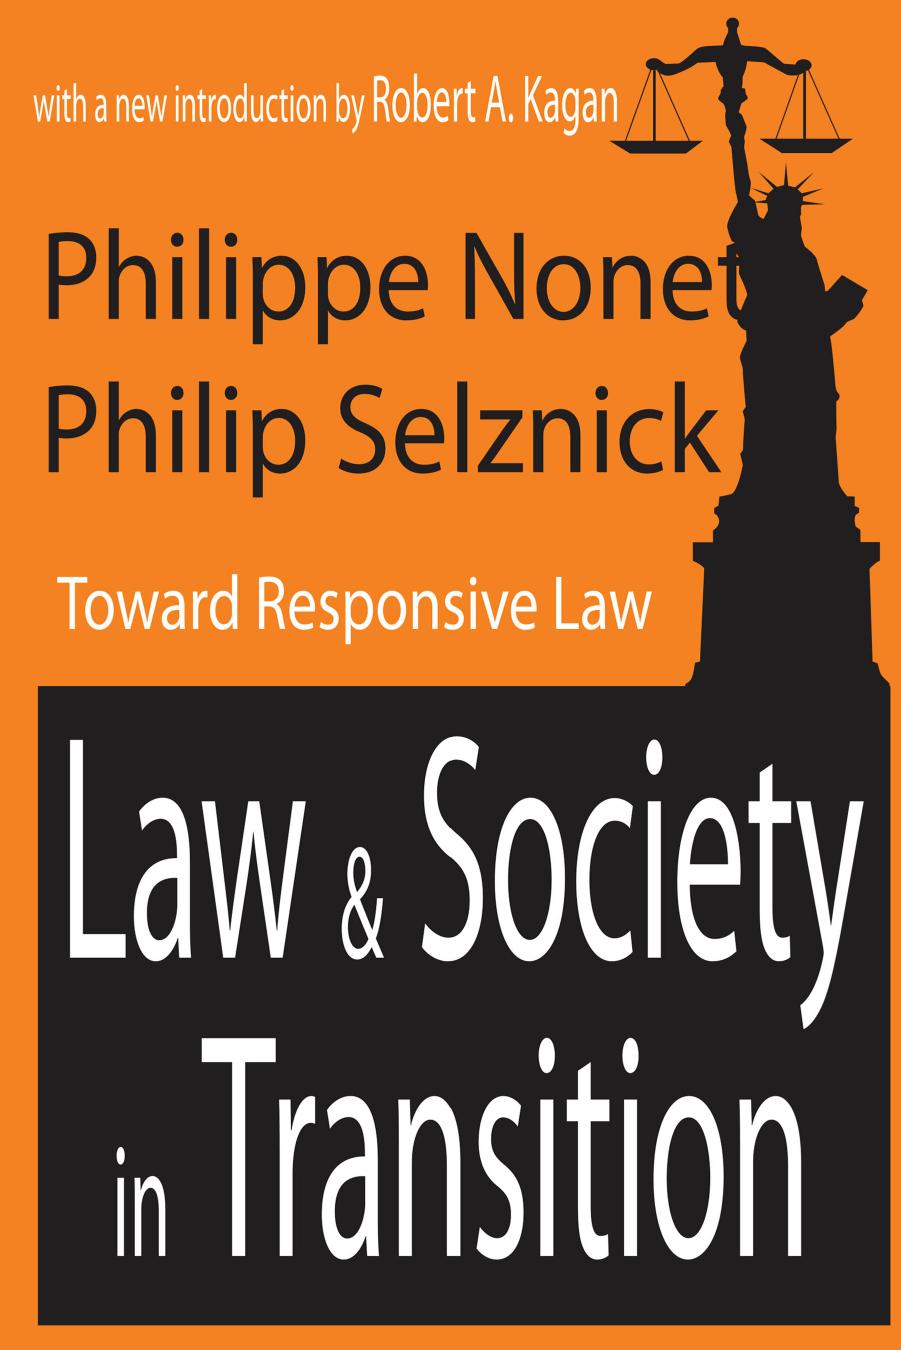 Law & Society in Transition